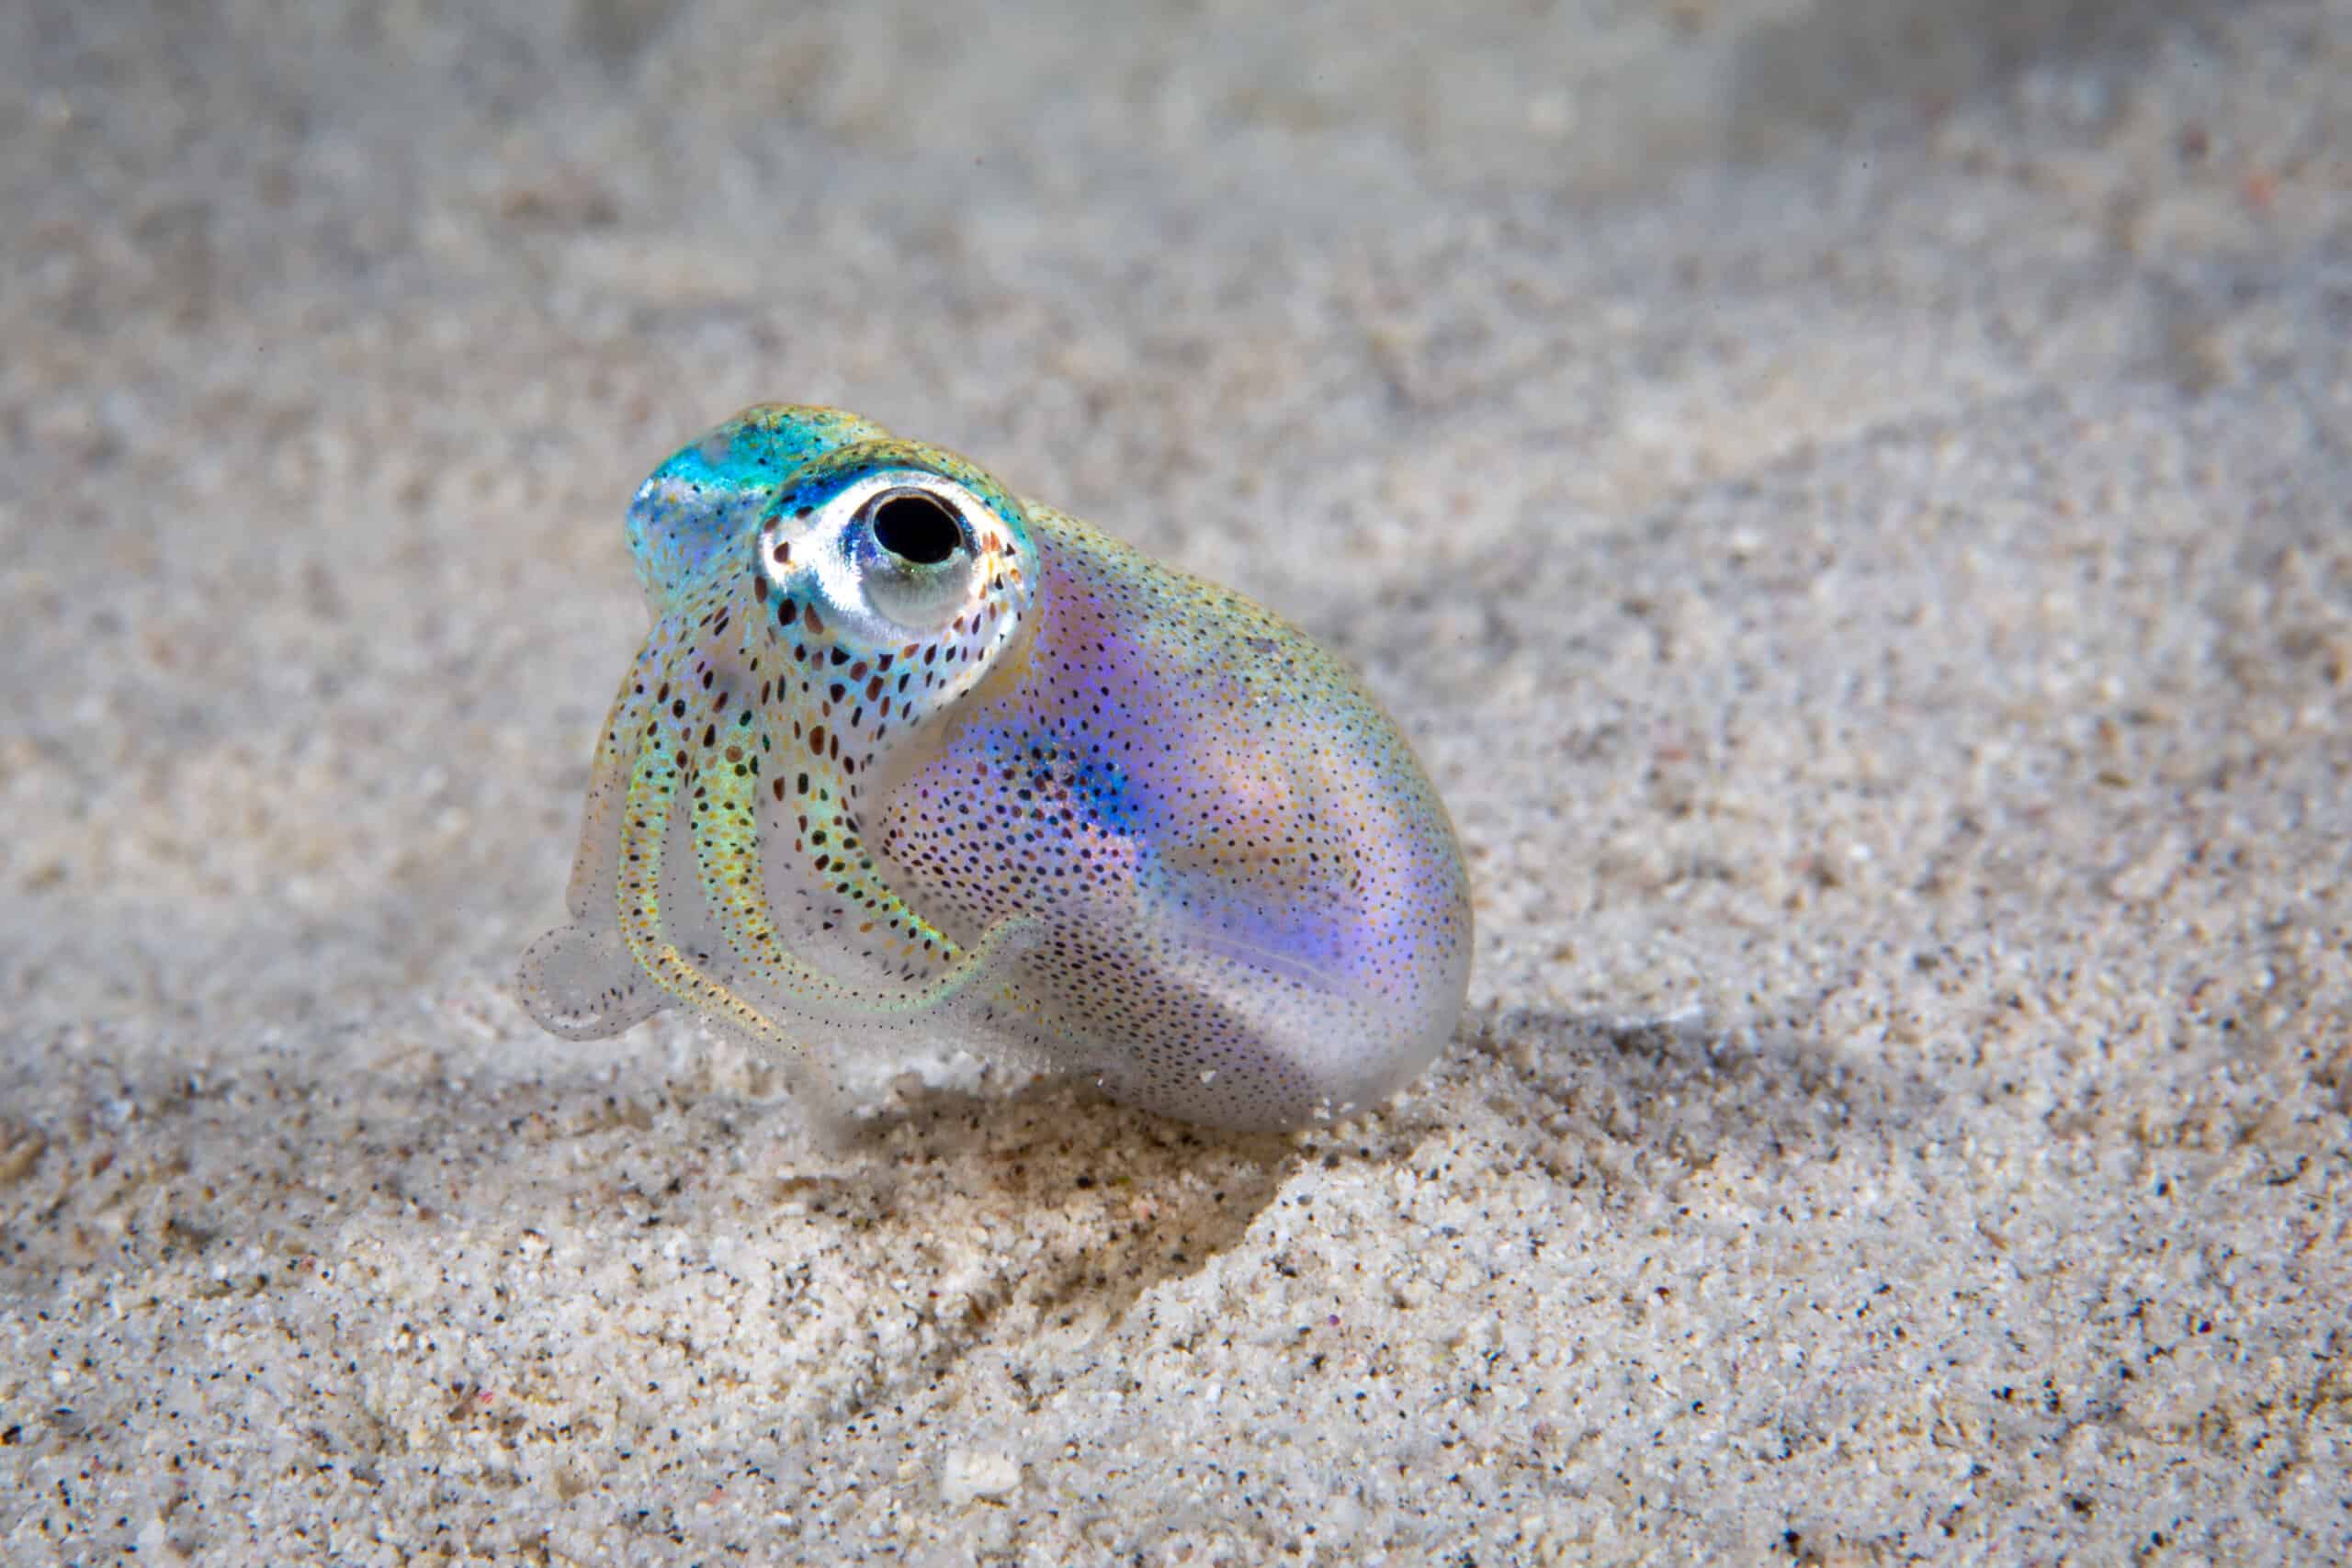 Hawaiian bobtail squid are tiny - only around 1 or 2 inches long